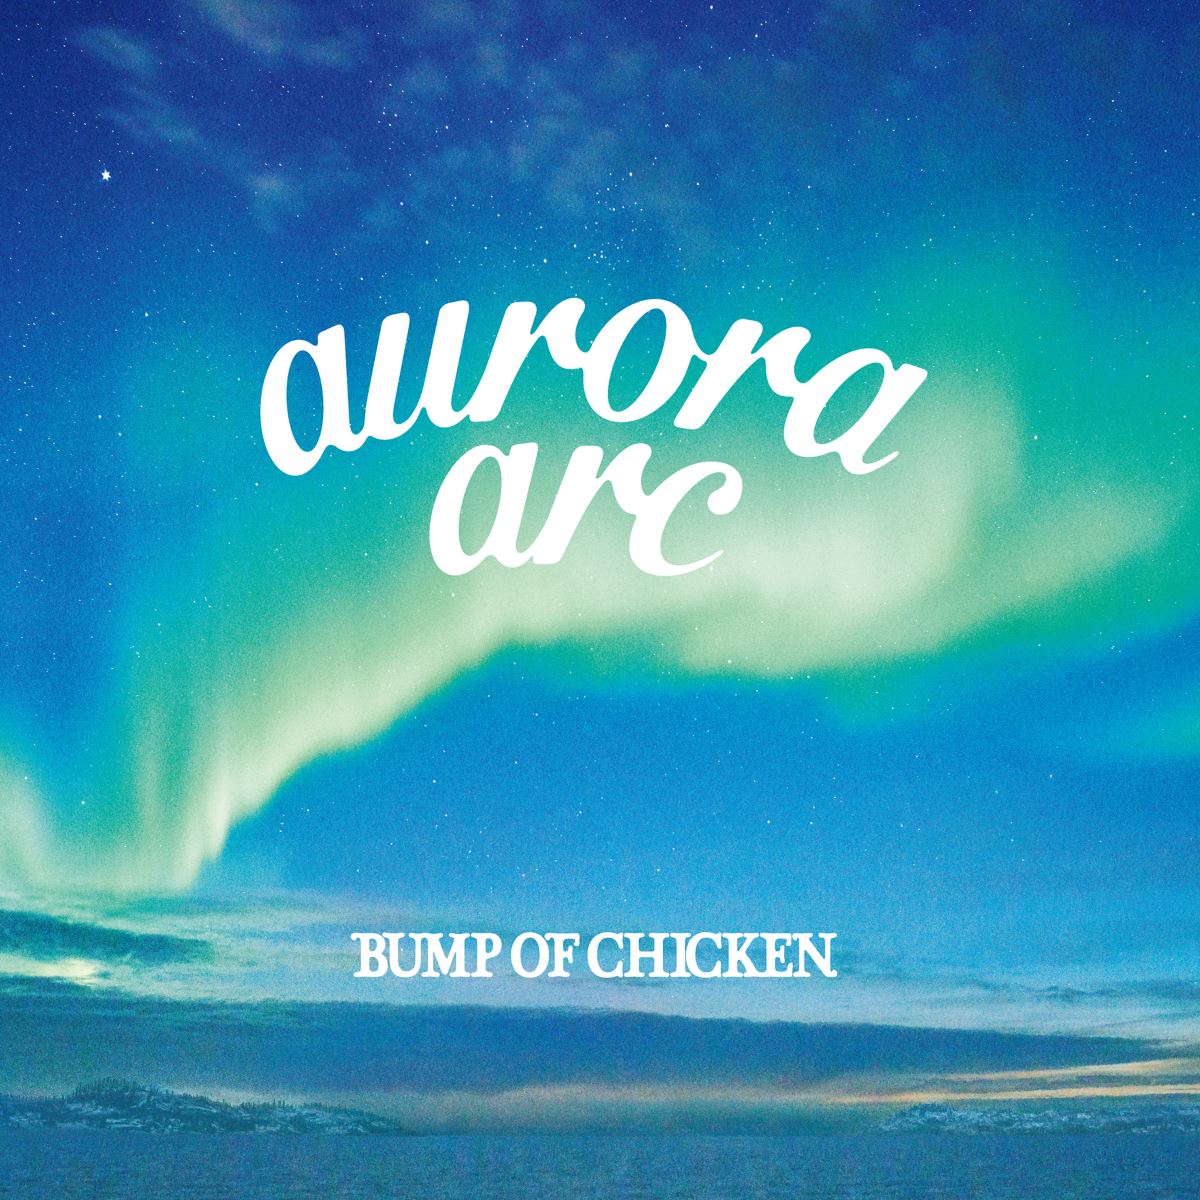 Cover for『BUMP OF CHICKEN - Shinsekai』from the release『aurora arc』